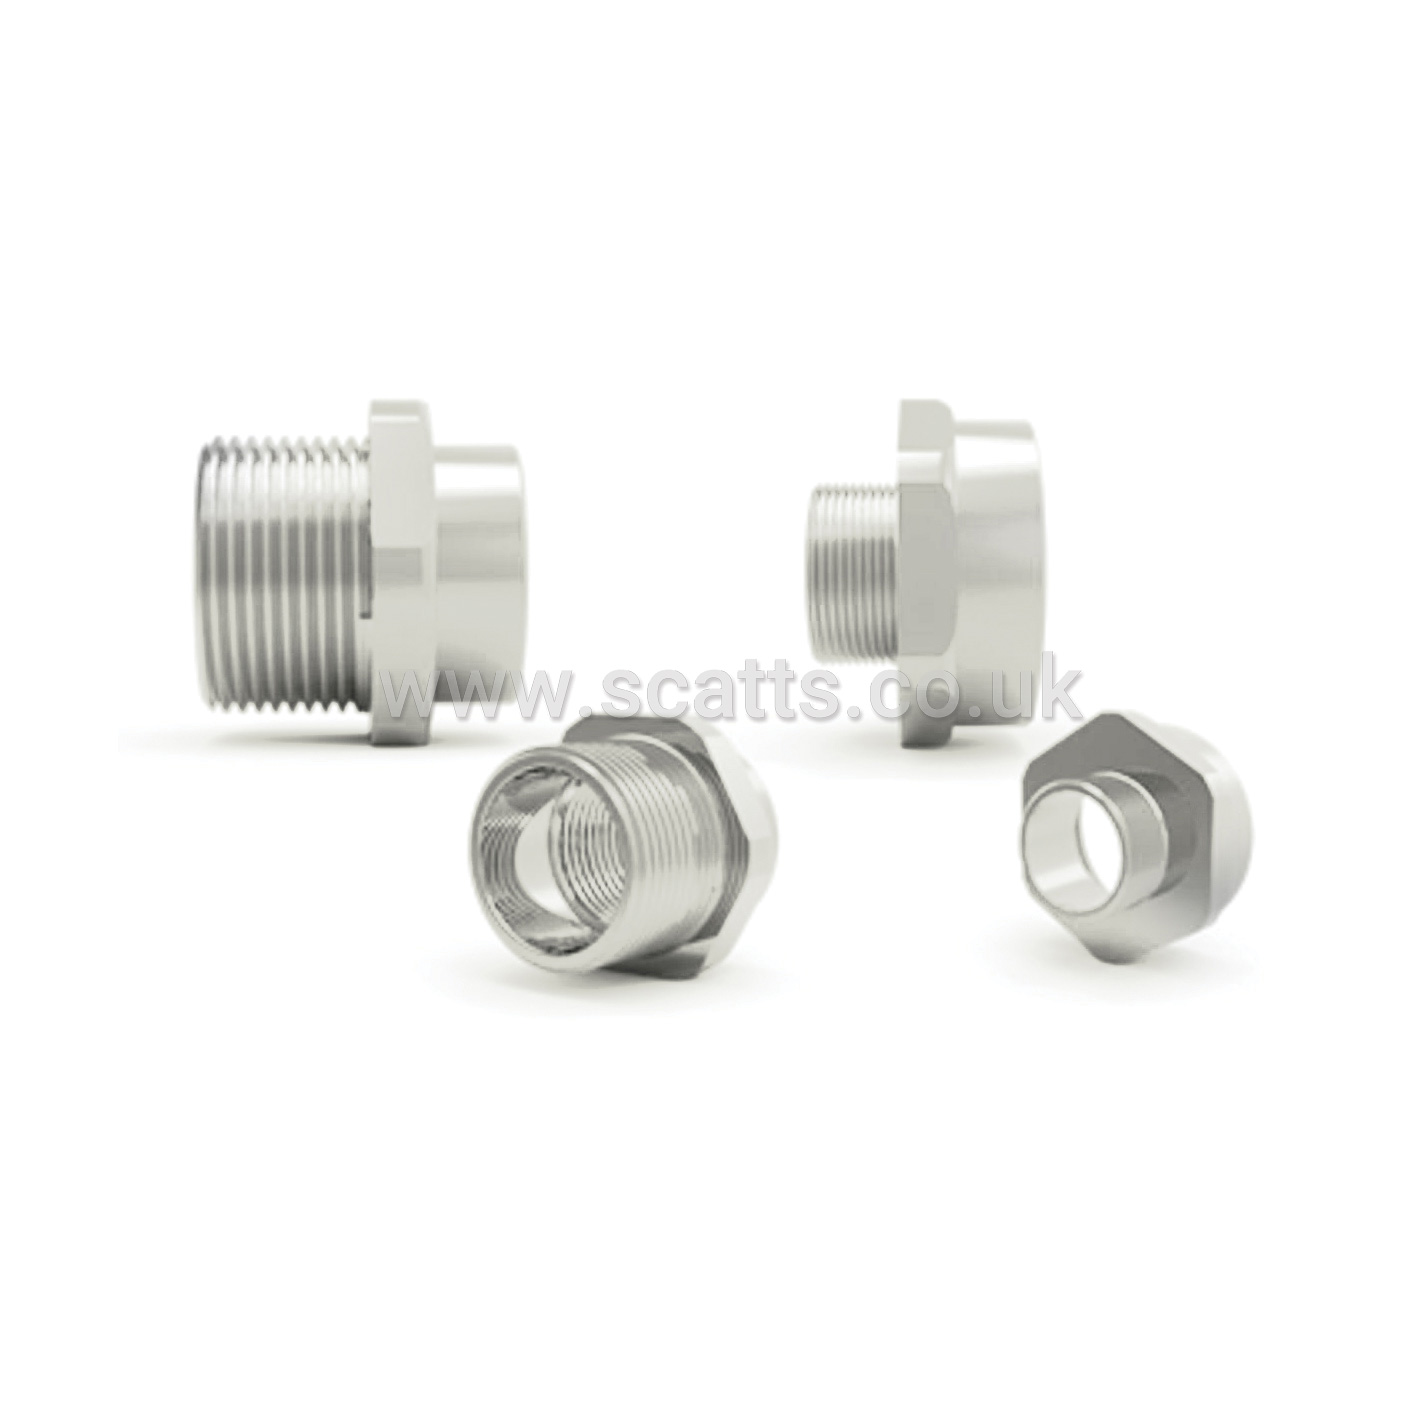 Nickel-plated brass PG - ex stock - Order now